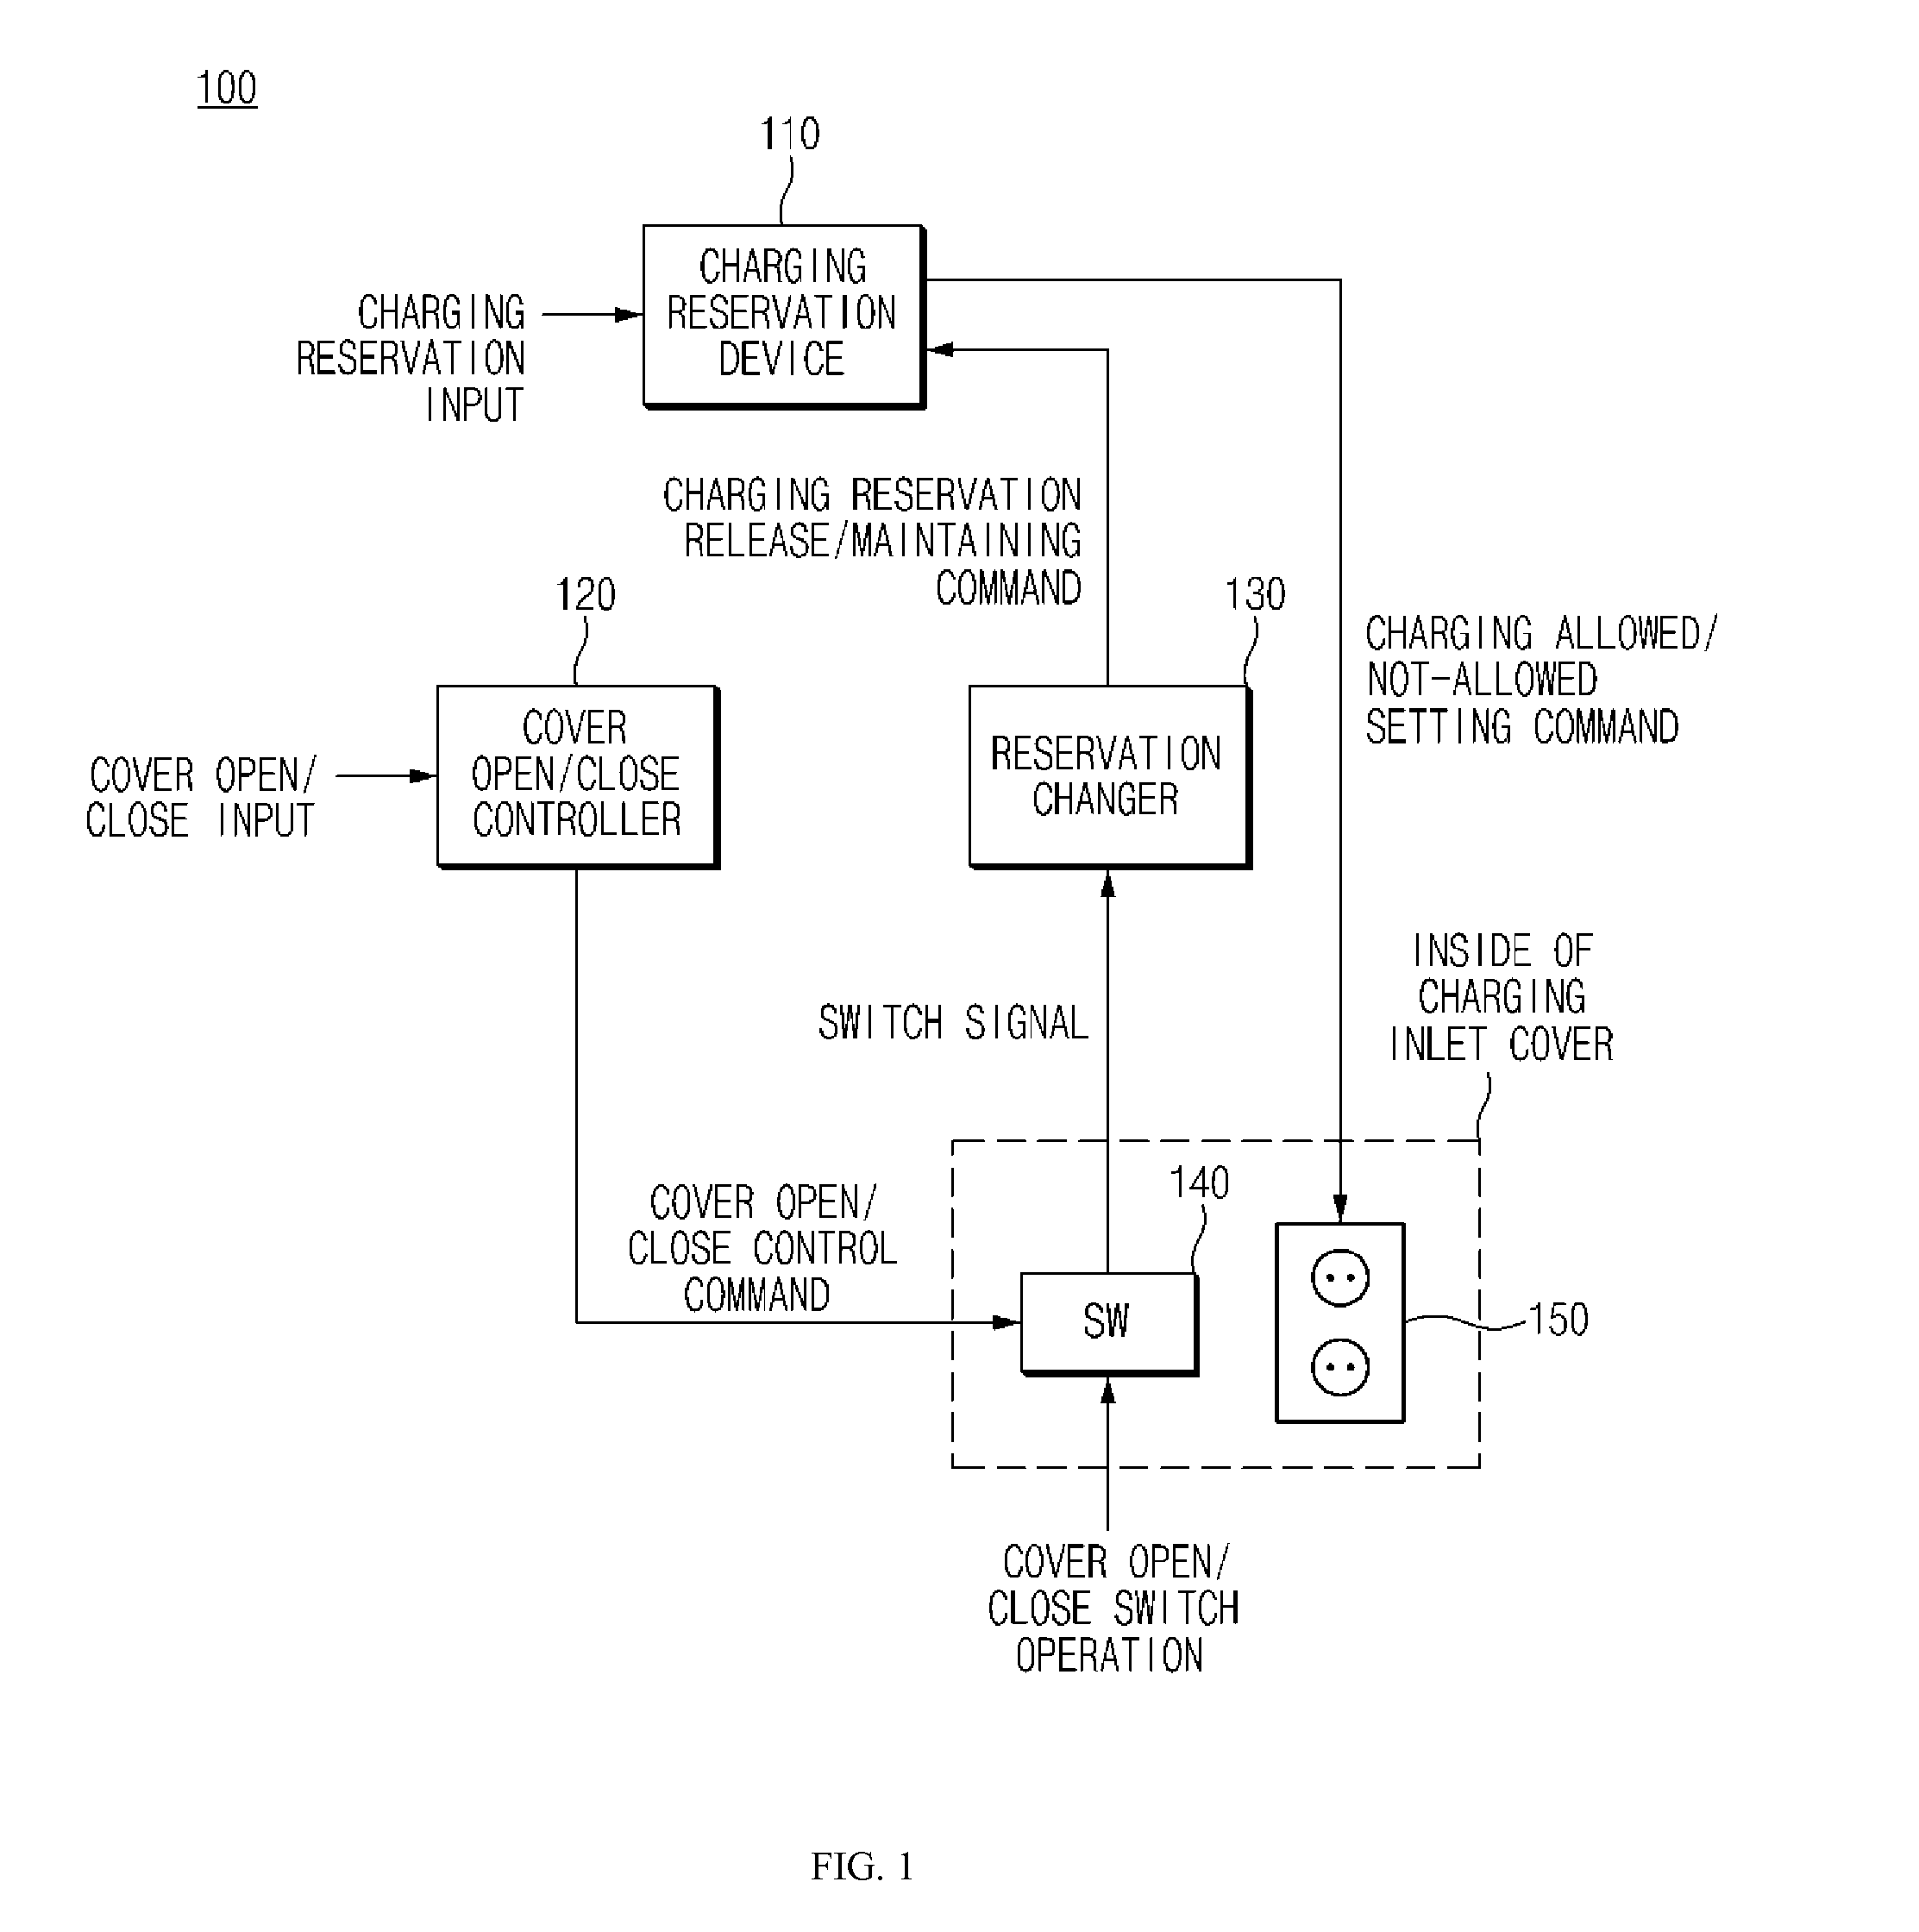 Method and apparatus for cancelling a charge reservation of an electric vehicle